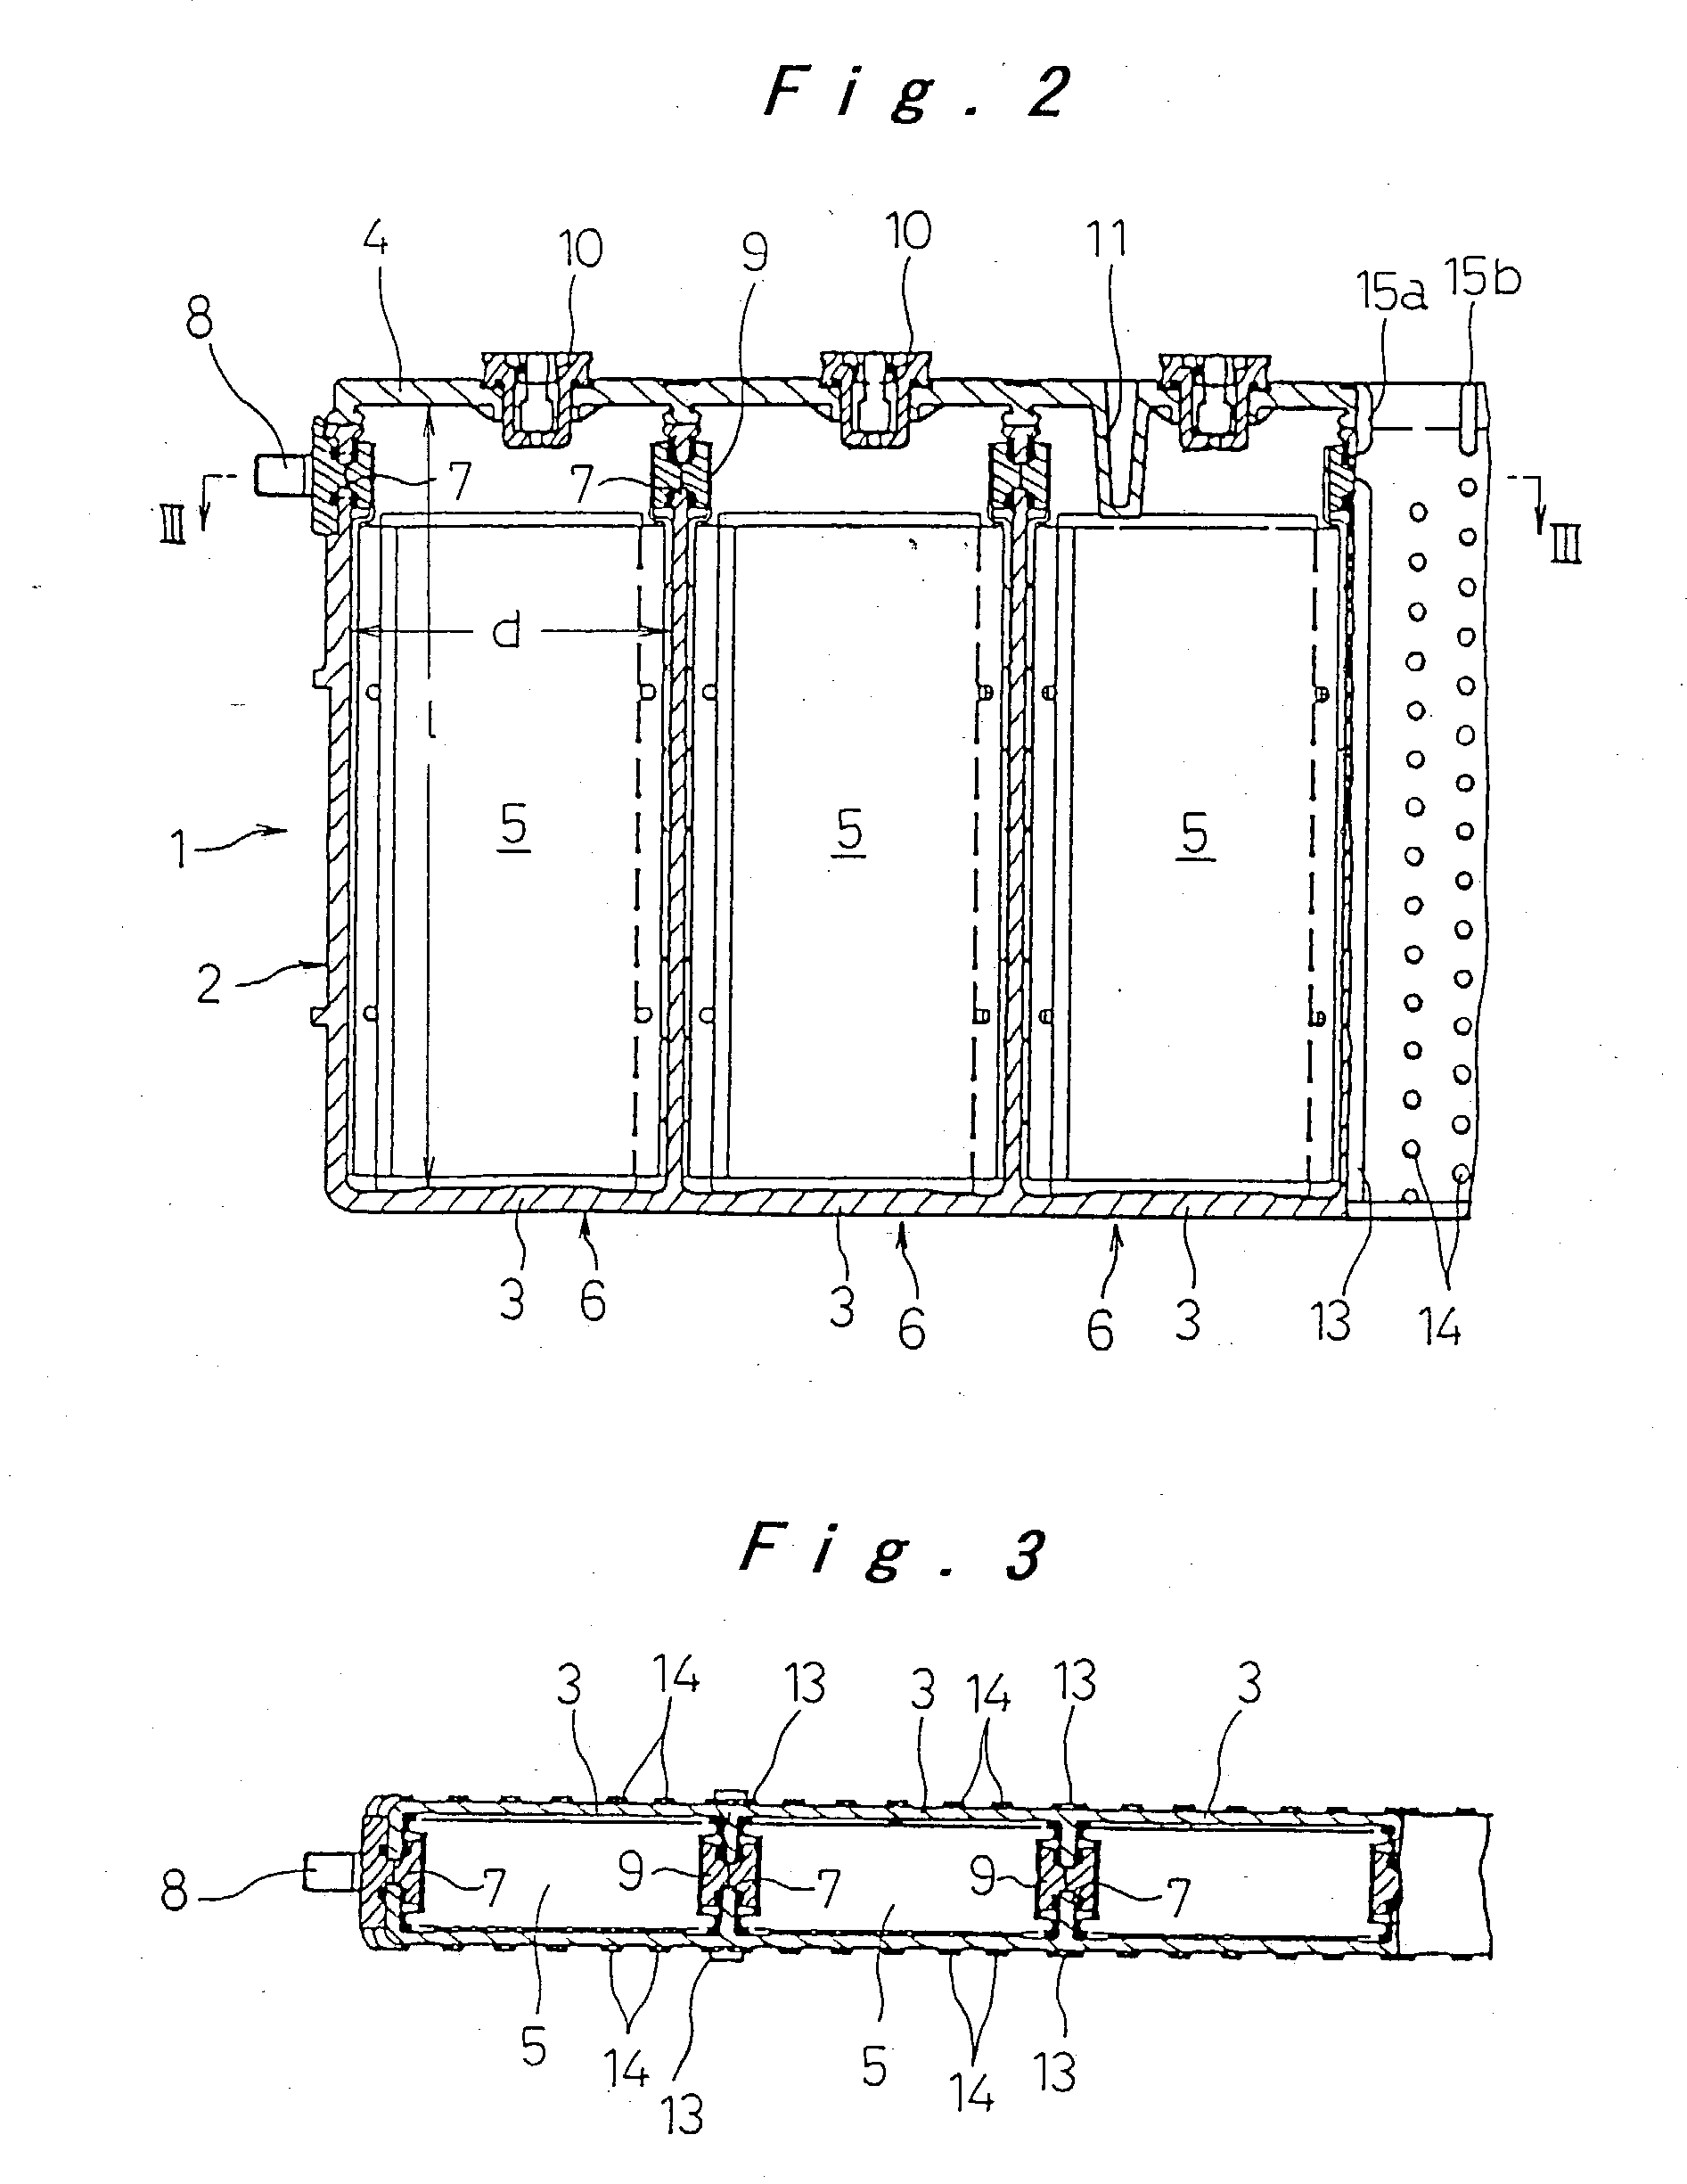 Battery module, and rechargeable battery for constituting the battery module